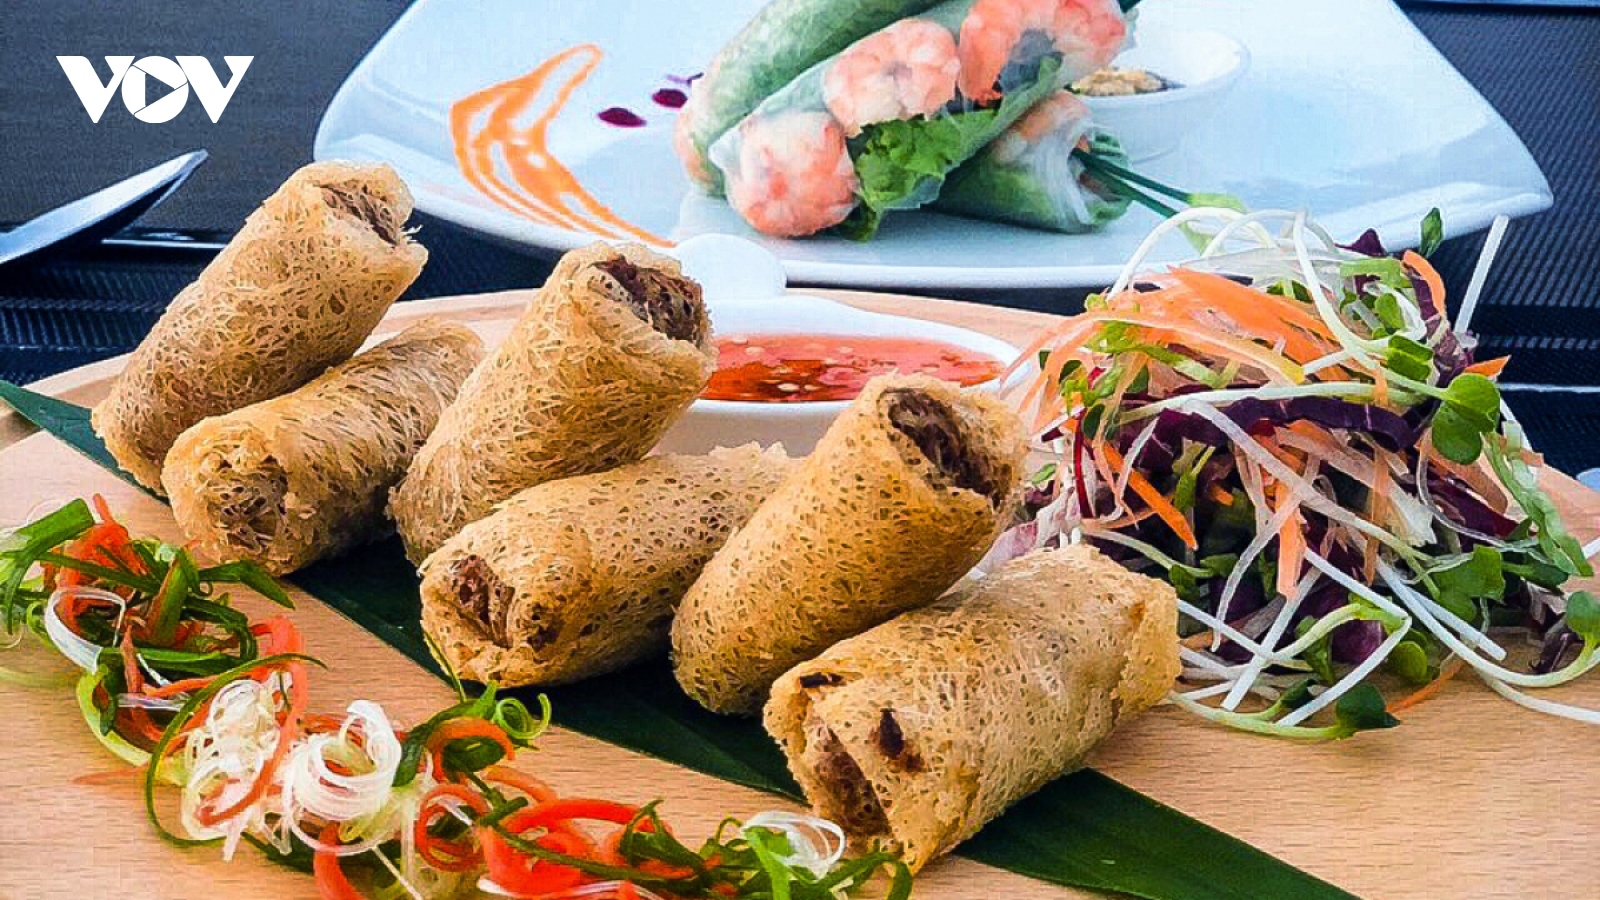 Vietnam named as Asia’s Leading Culinary Destination 2020